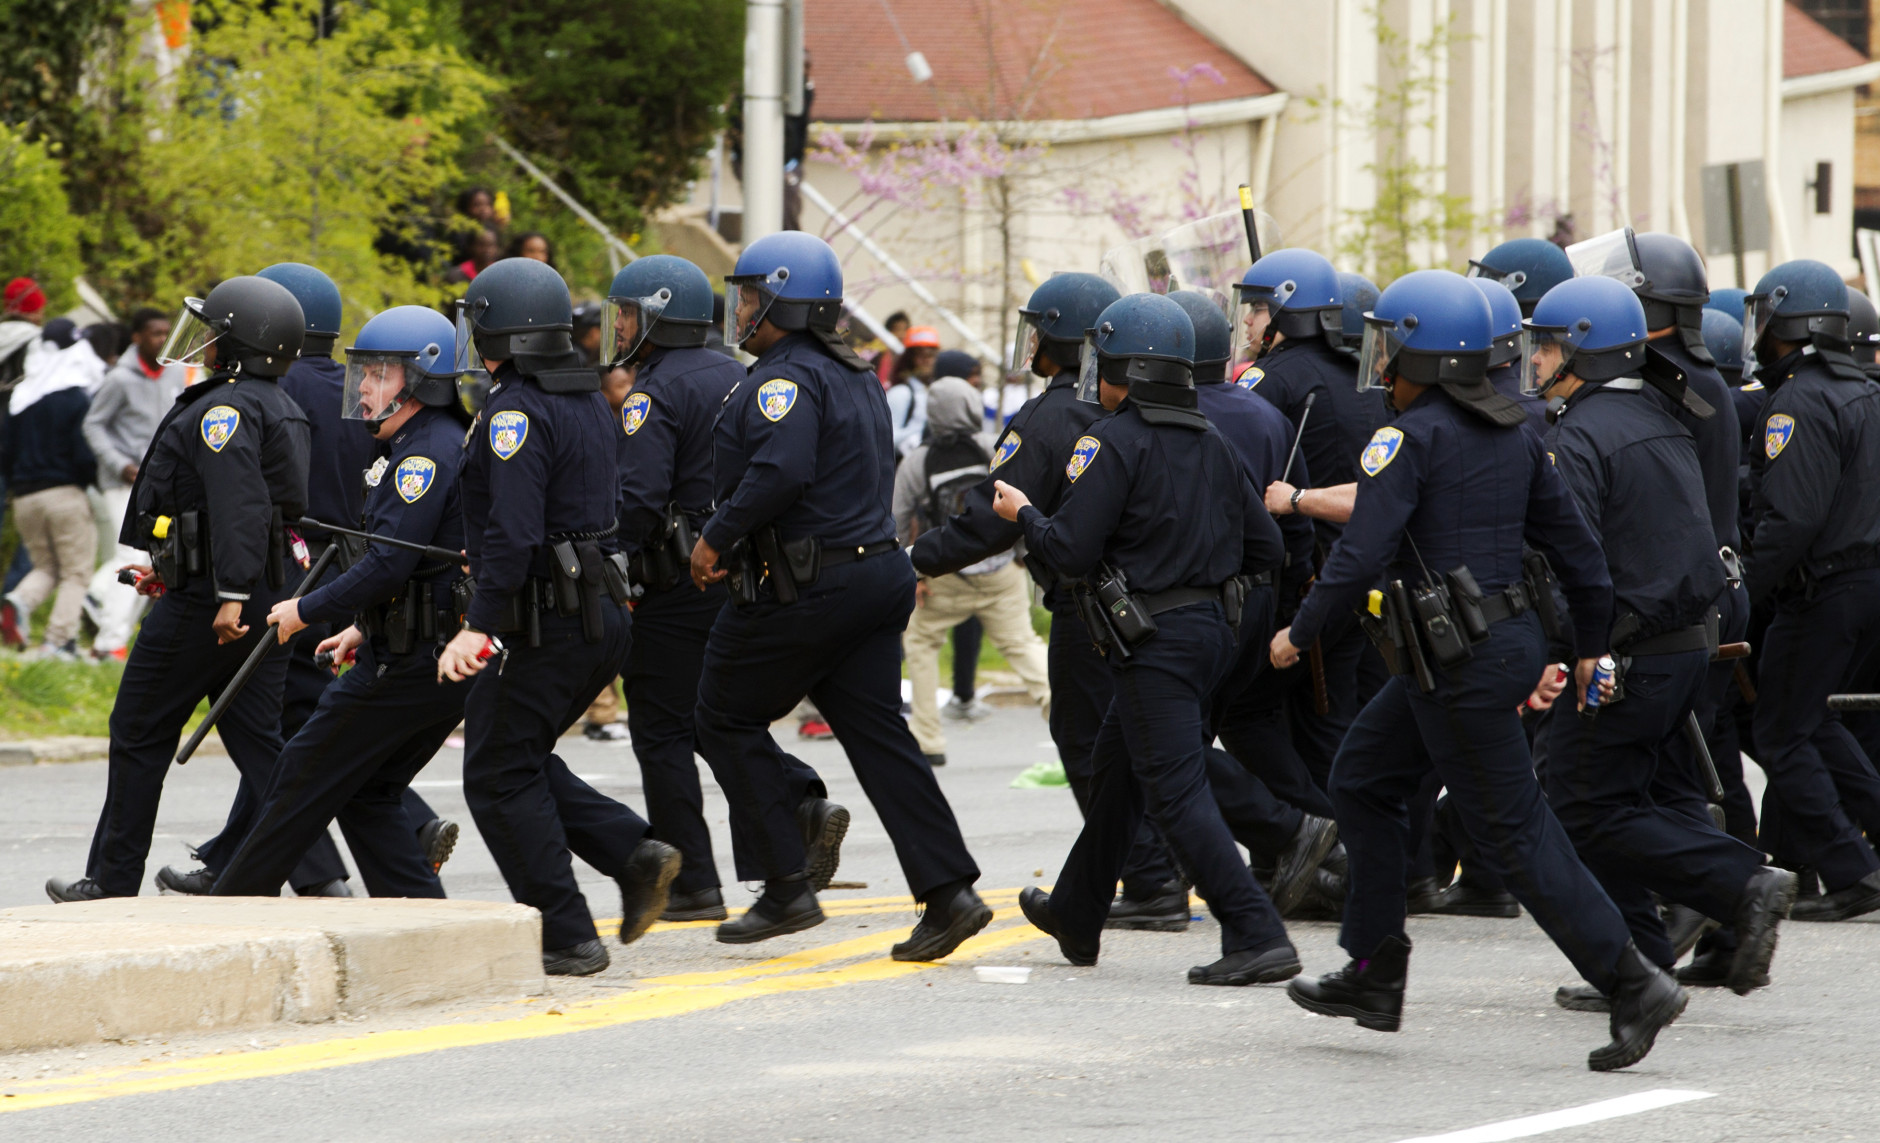 Baltimore police officers push back demonstrators who are throwing rocks at the police, after the funeral of Freddie Gray, Monday, April 27, 2015, at New Shiloh Baptist Church in Baltimore. Gray died from spinal injuries about a week after he was arrested and transported in a Baltimore Police Department van.  (AP Photo/Jose Luis Magana)